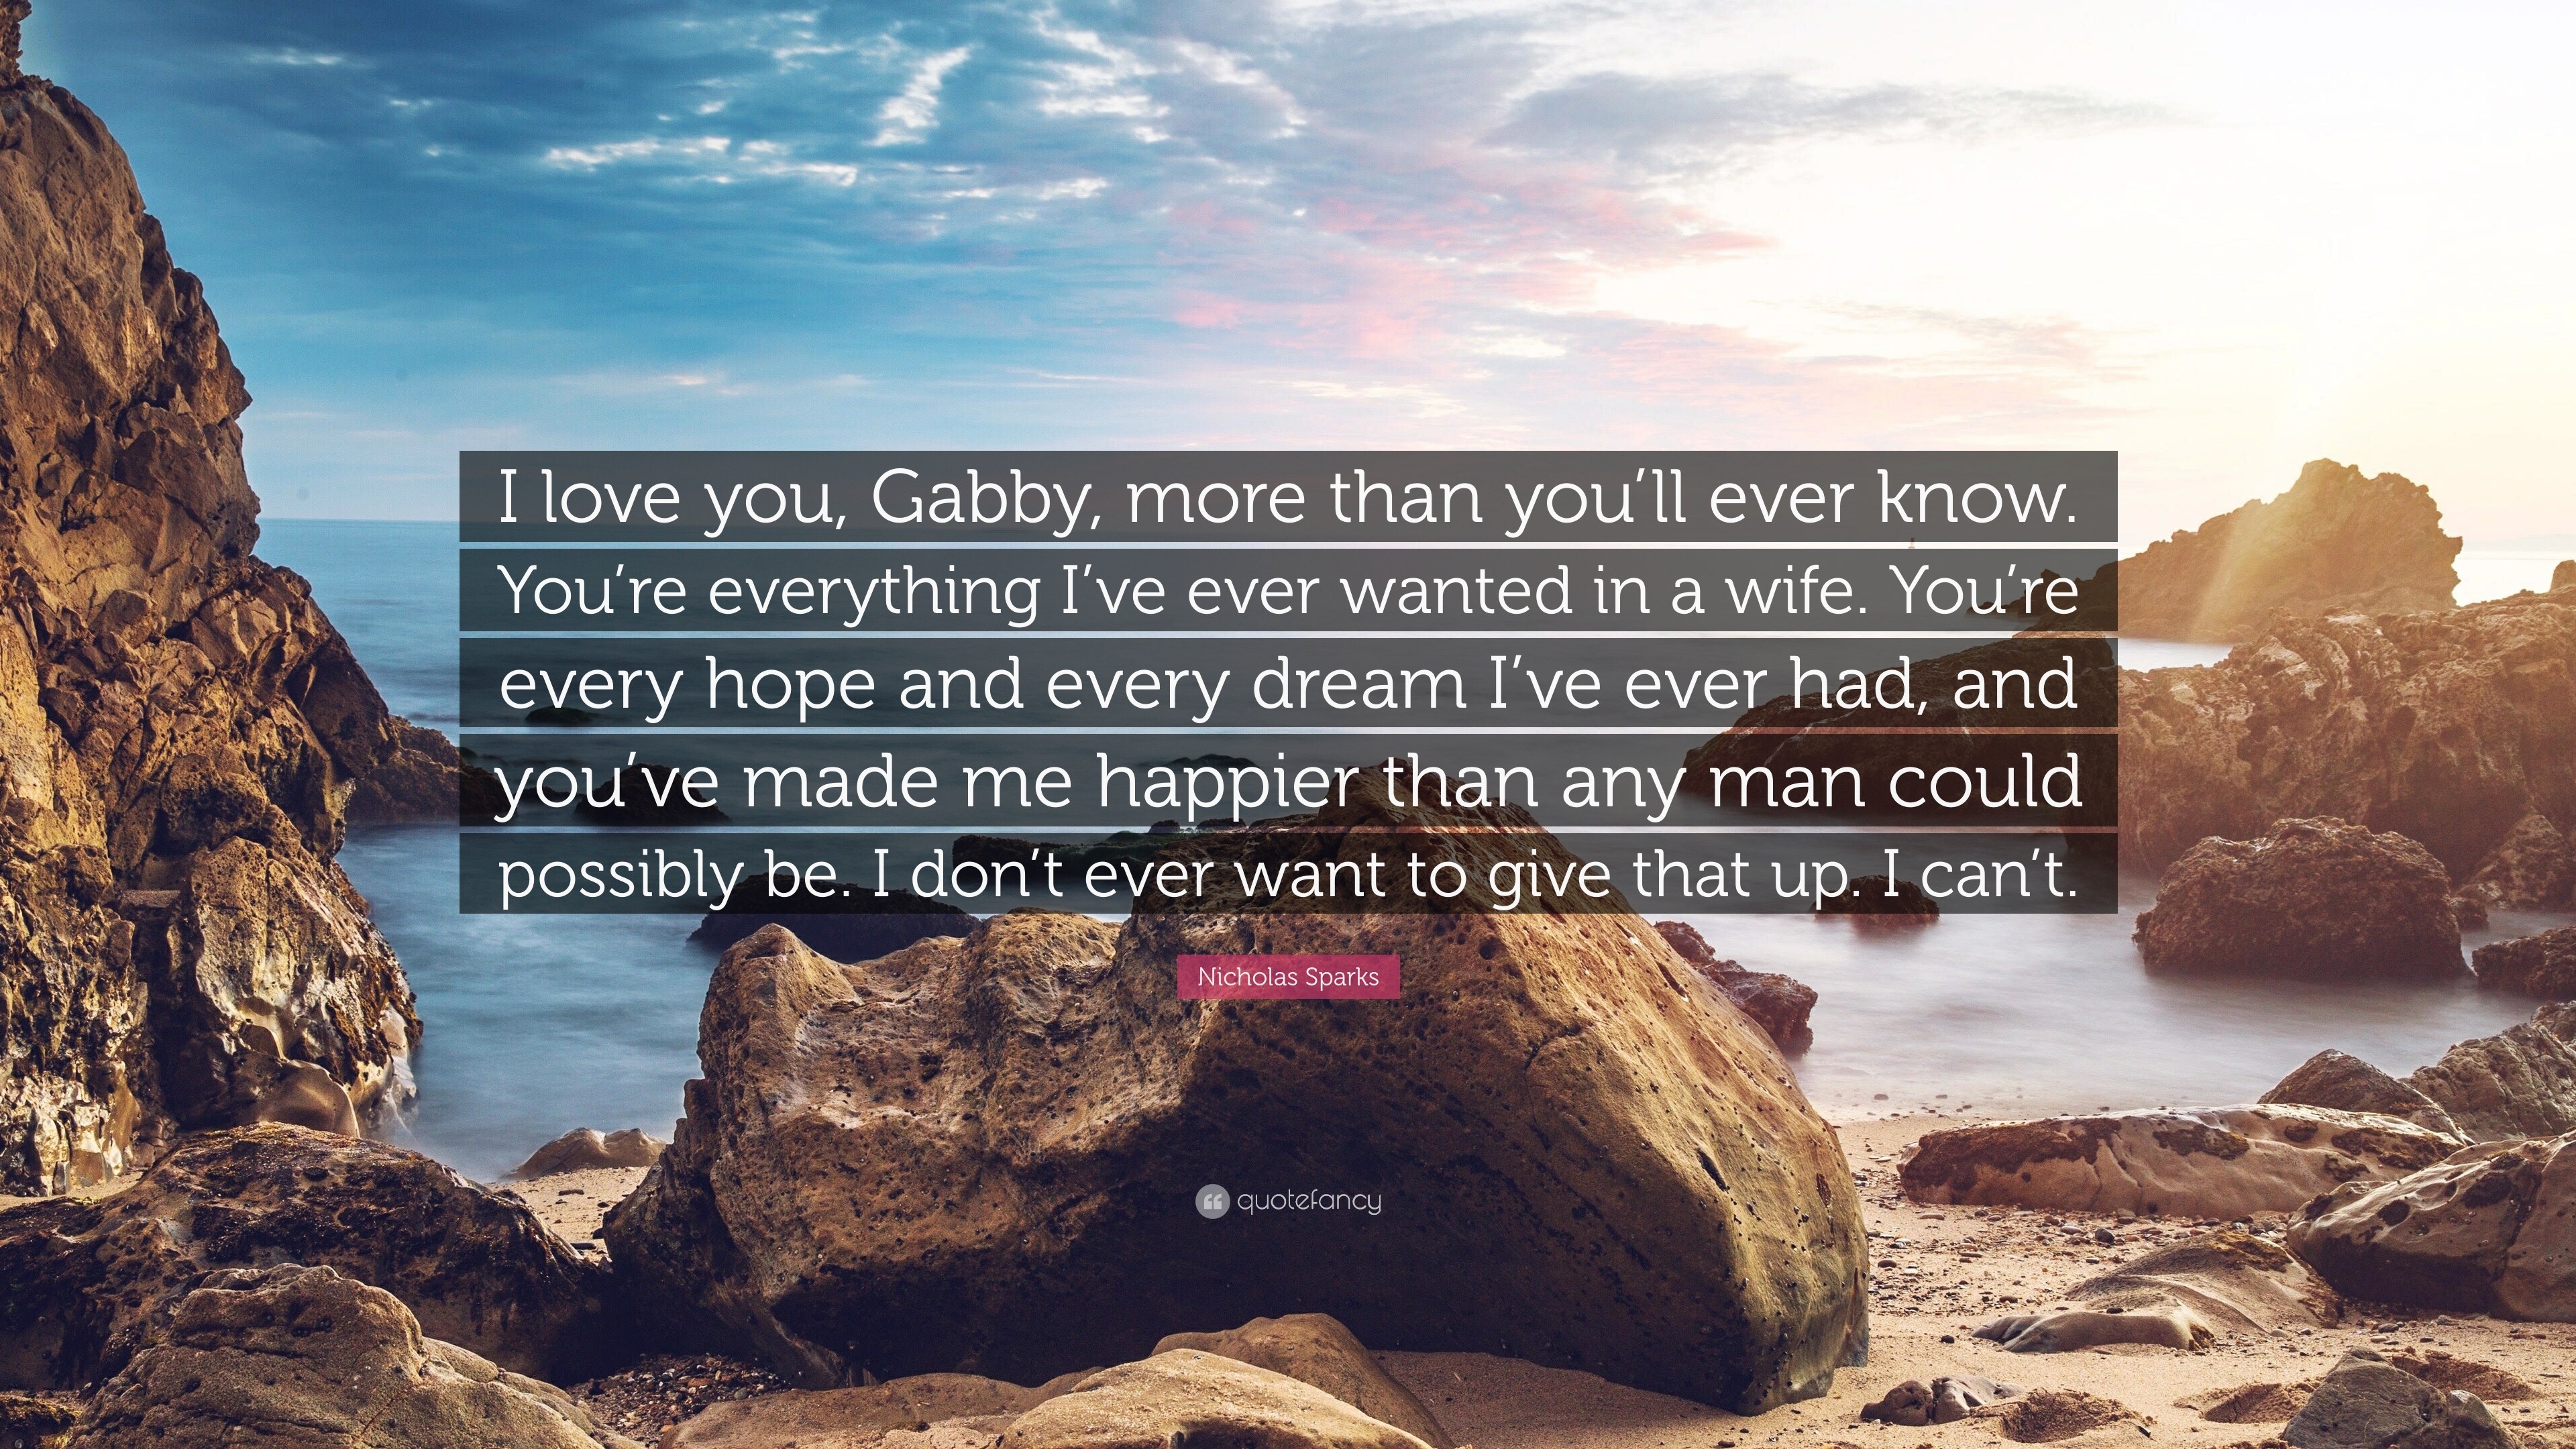 Nicholas Sparks Quote: “I love you, Gabby, more than you ...